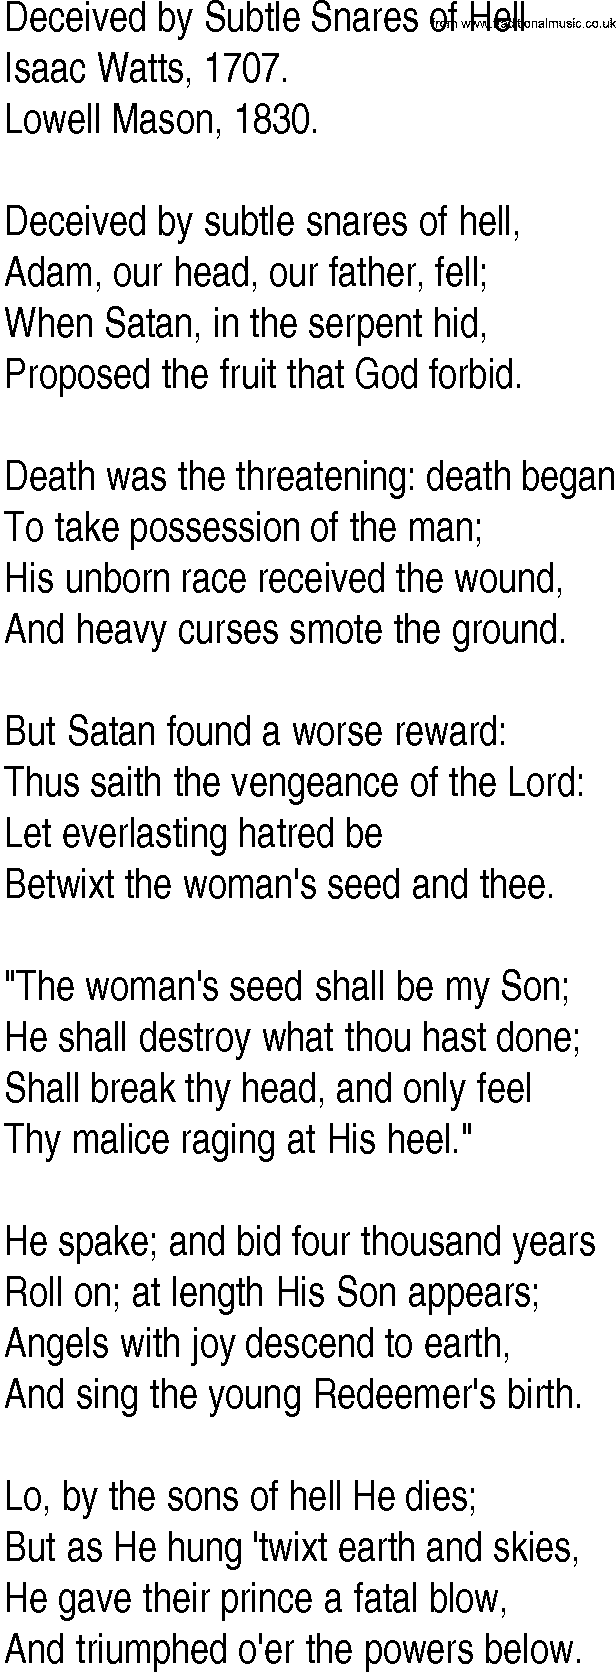 Hymn and Gospel Song: Deceived by Subtle Snares of Hell by Isaac Watts lyrics